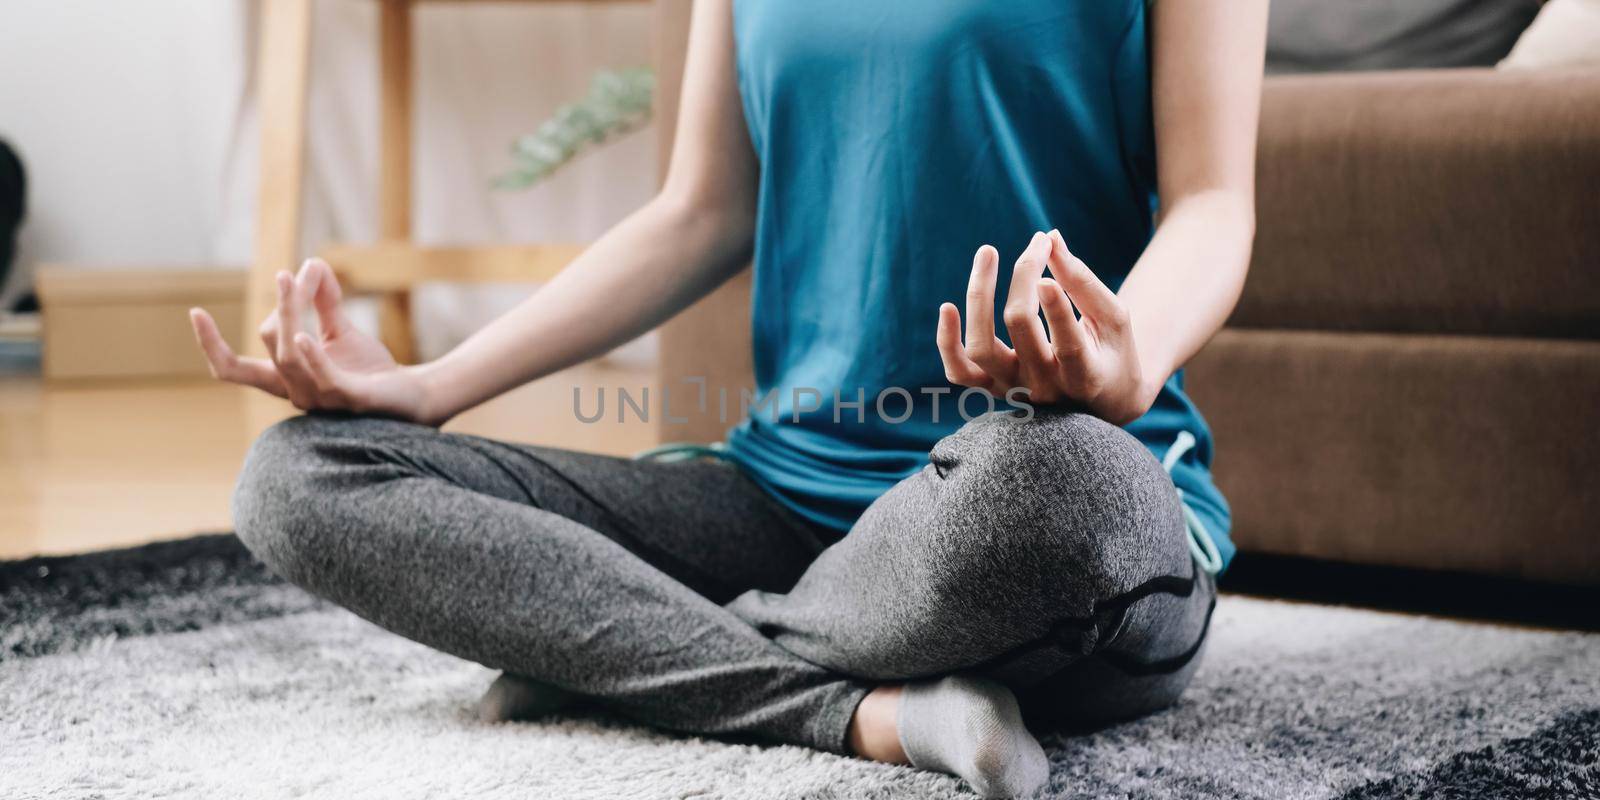 Class of yoga with meditate hands of Asia woman doing meditation Healthcare, lifestyle concept.National Physical Fitness and Sports Month. National Yoga Awareness Month